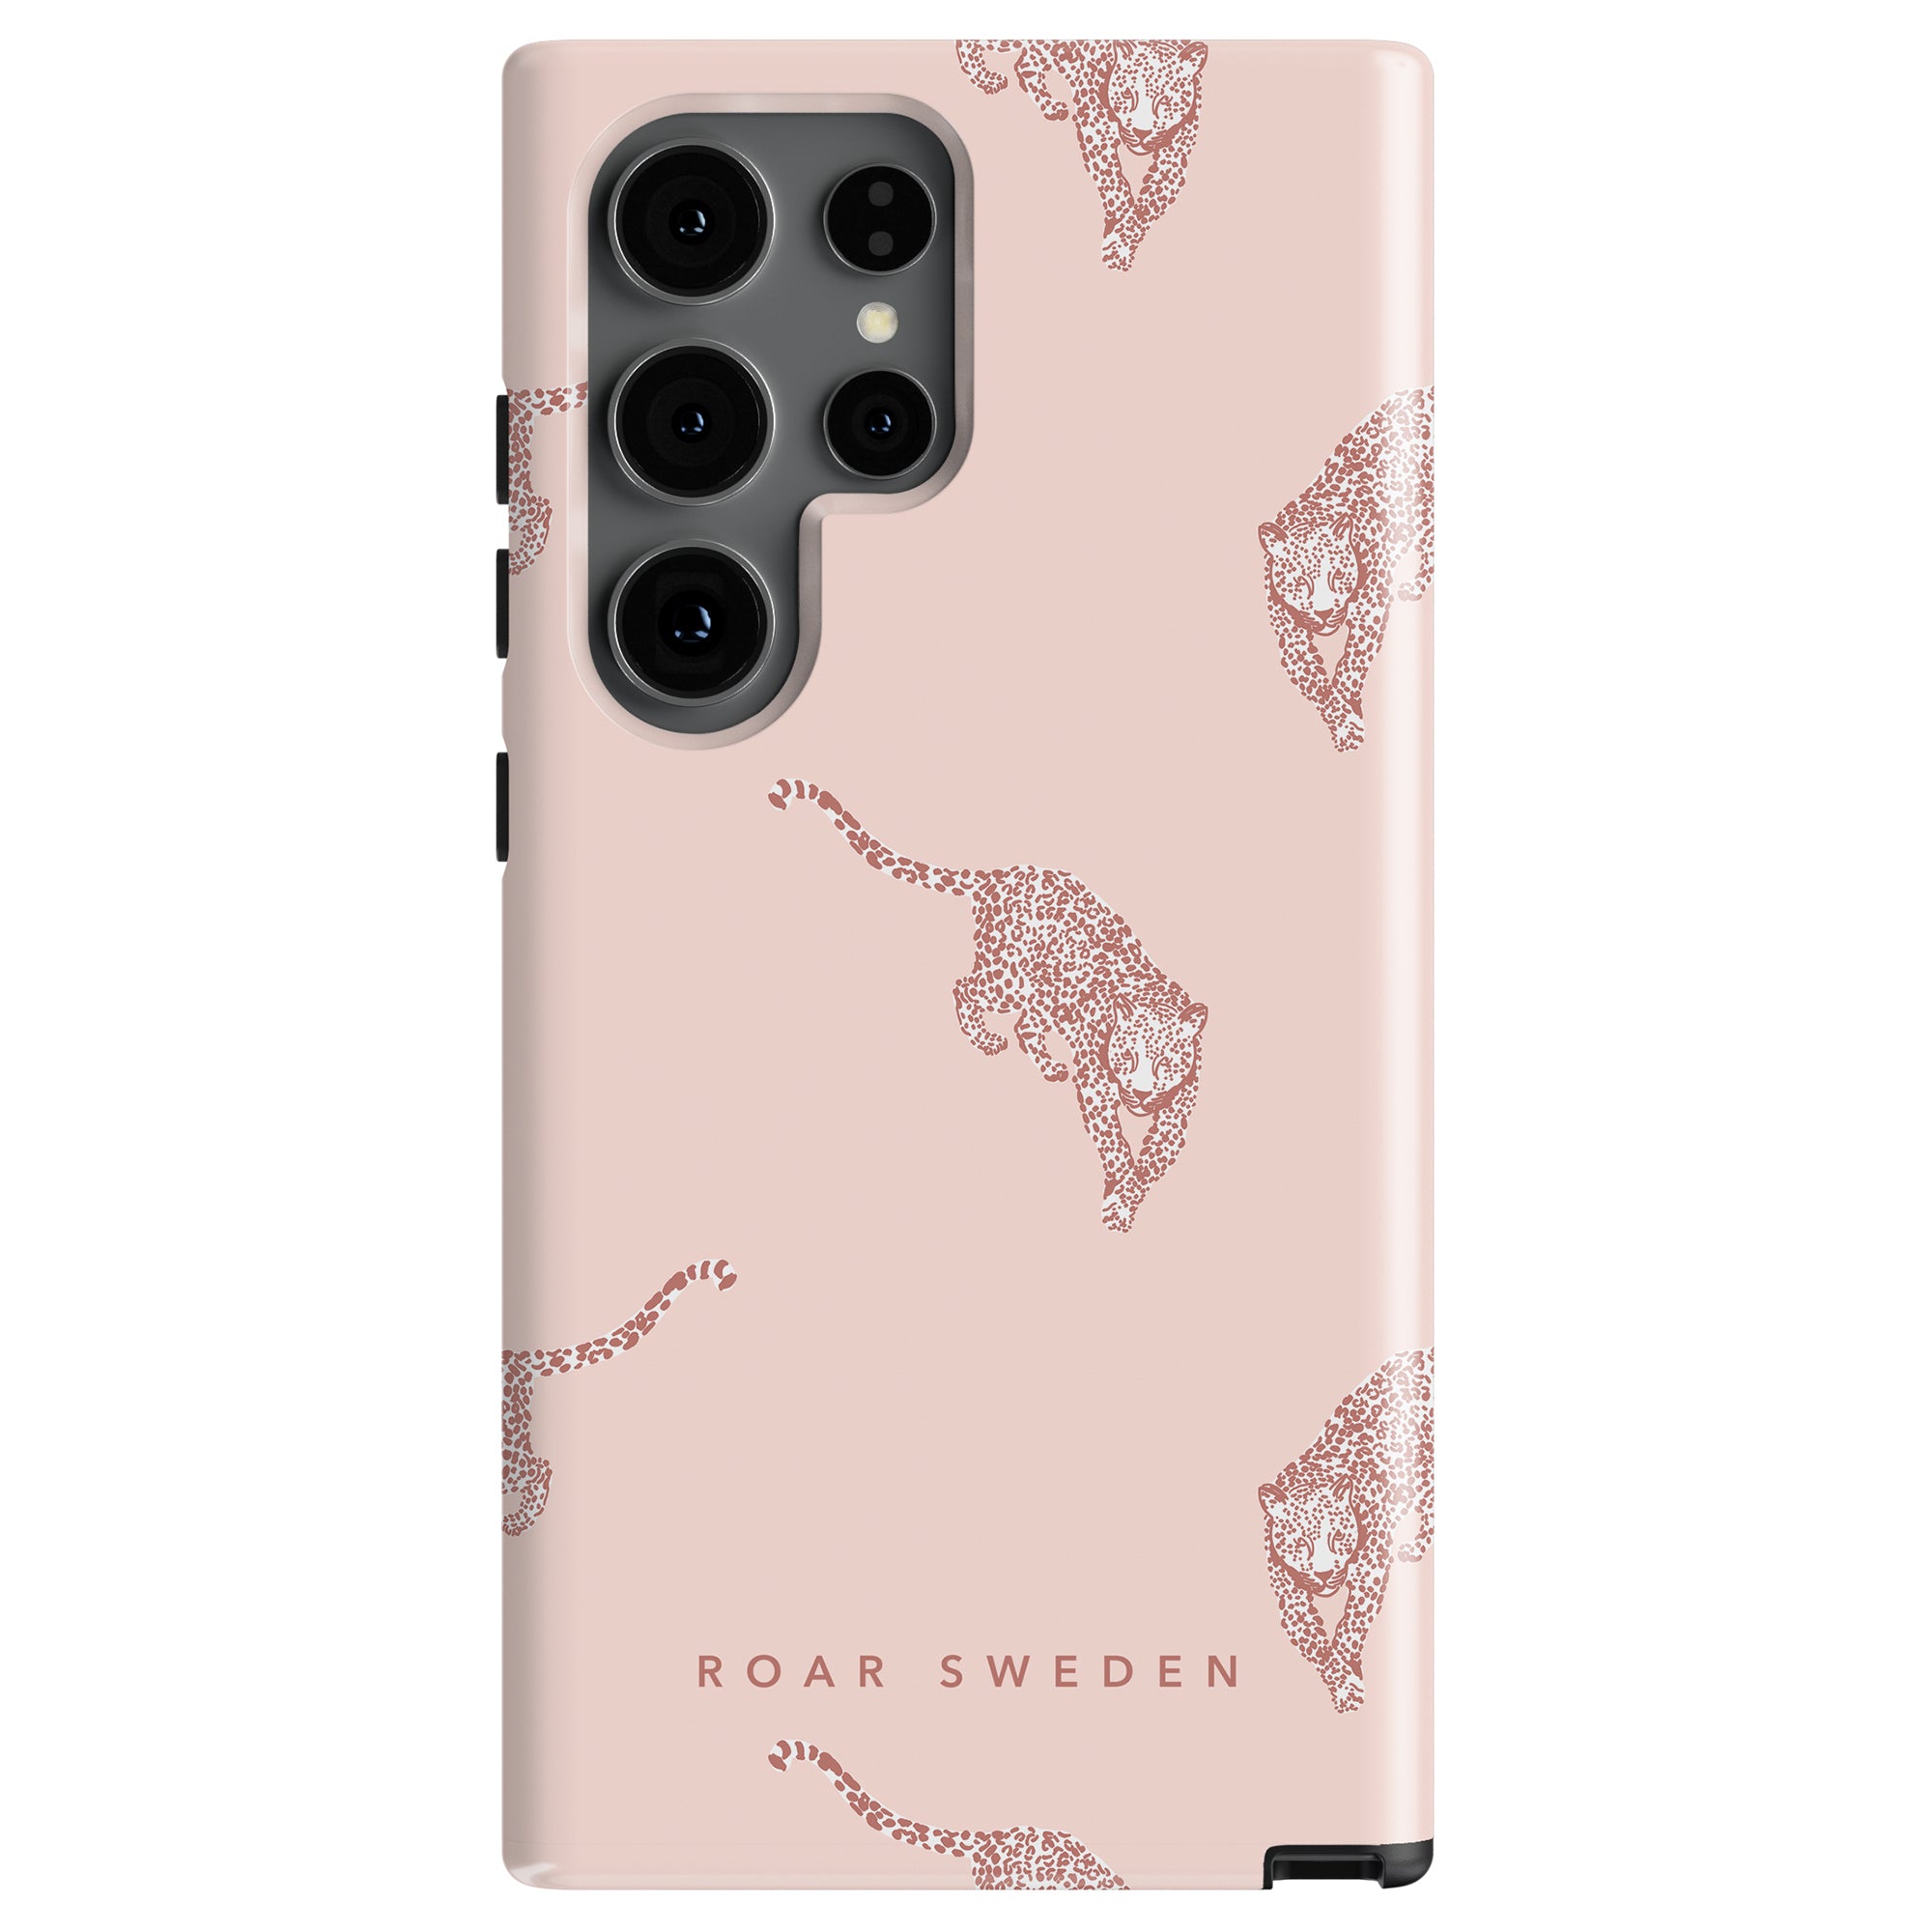 A light pink Kitty - Tough Case with black camera cutouts and a pattern of sparkly silver leopard prints, branded with the text "Roar Sweden.